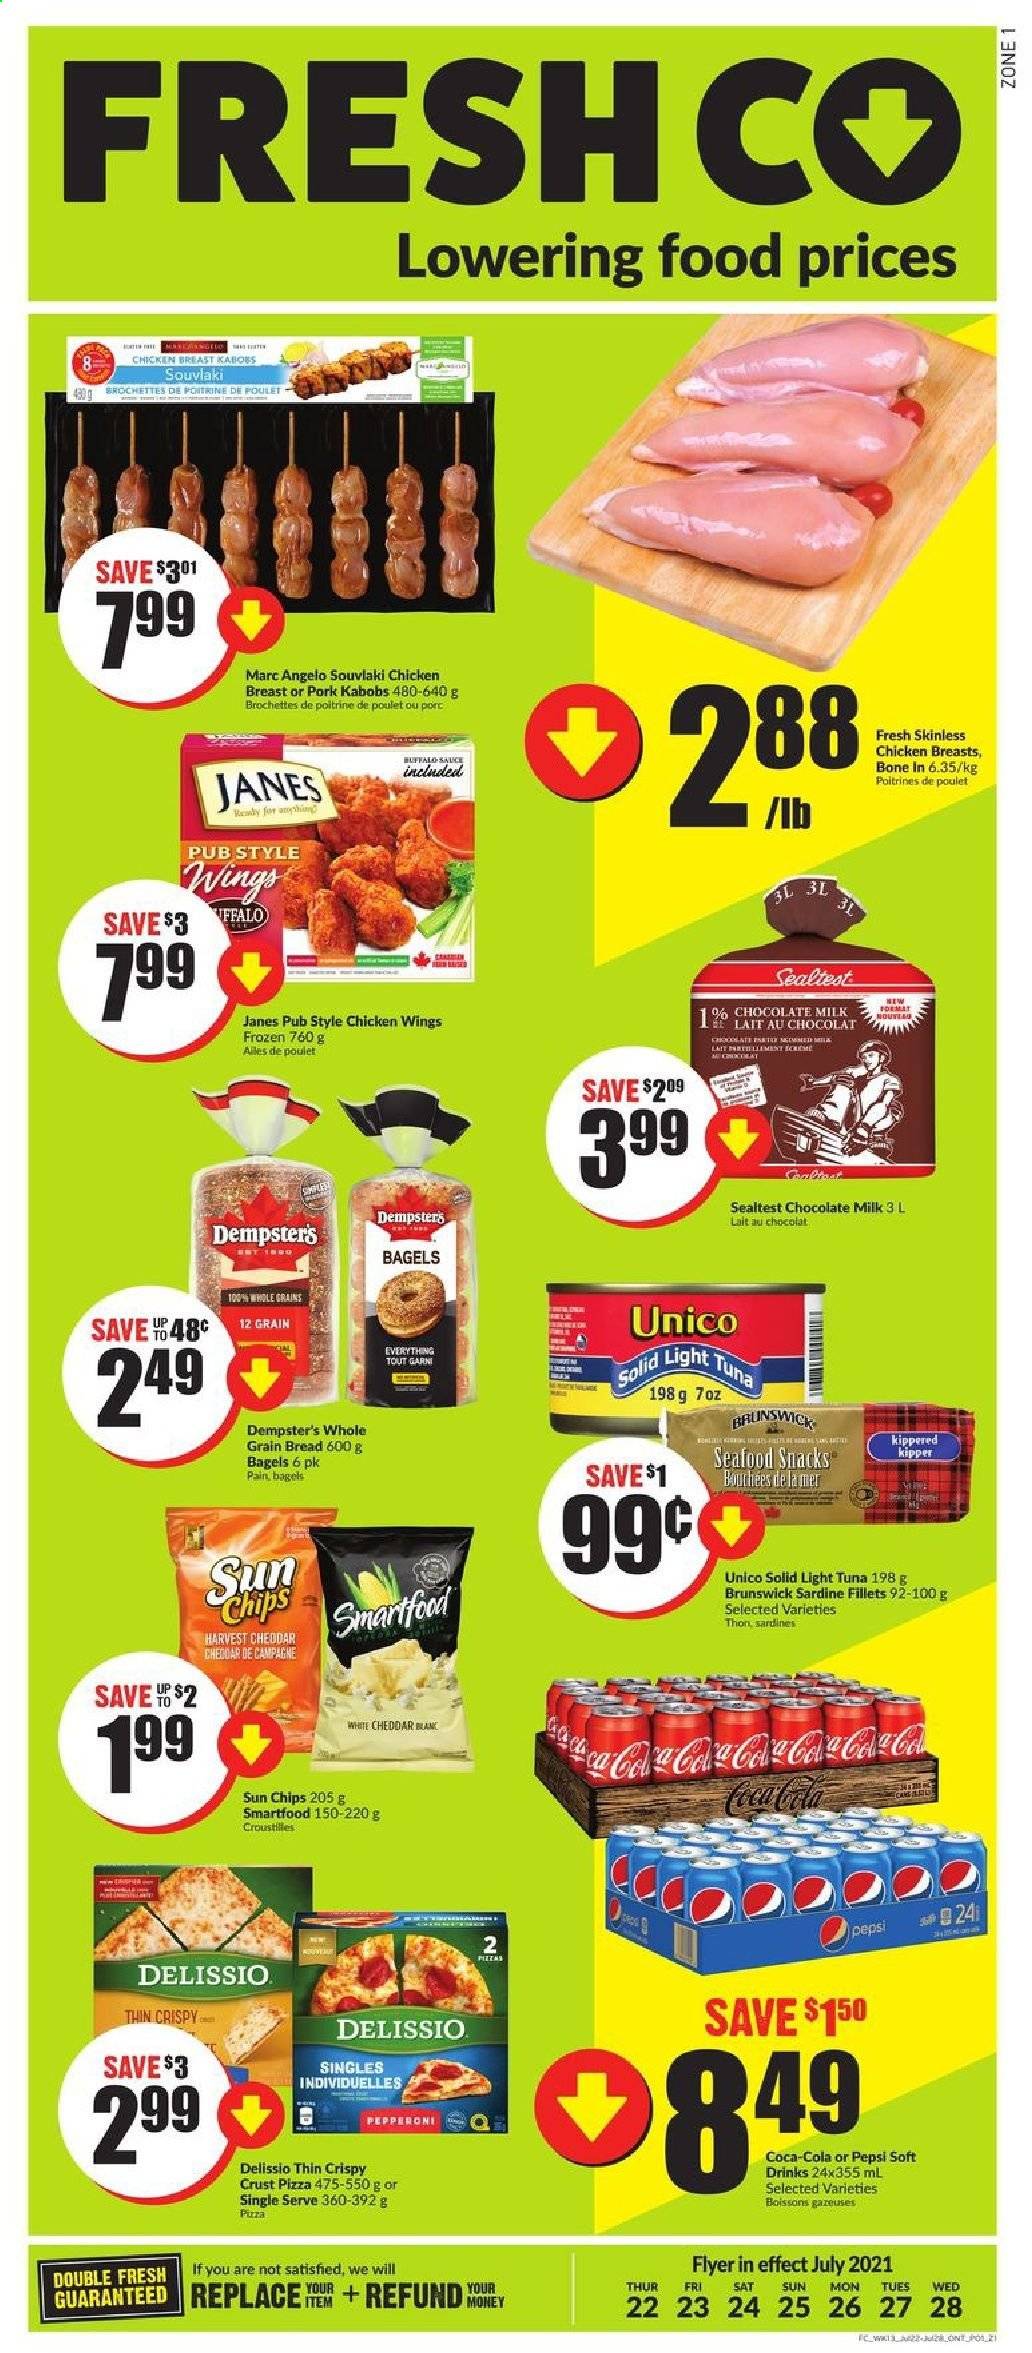 thumbnail - FreshCo. Flyer - July 22, 2021 - July 28, 2021 - Sales products - bagels, bread, sardines, tuna, seafood, pizza, sauce, pepperoni, milk, chicken wings, milk chocolate, chocolate, Smartfood, light tuna, Coca-Cola, Pepsi, soft drink, chicken breasts, chicken. Page 1.